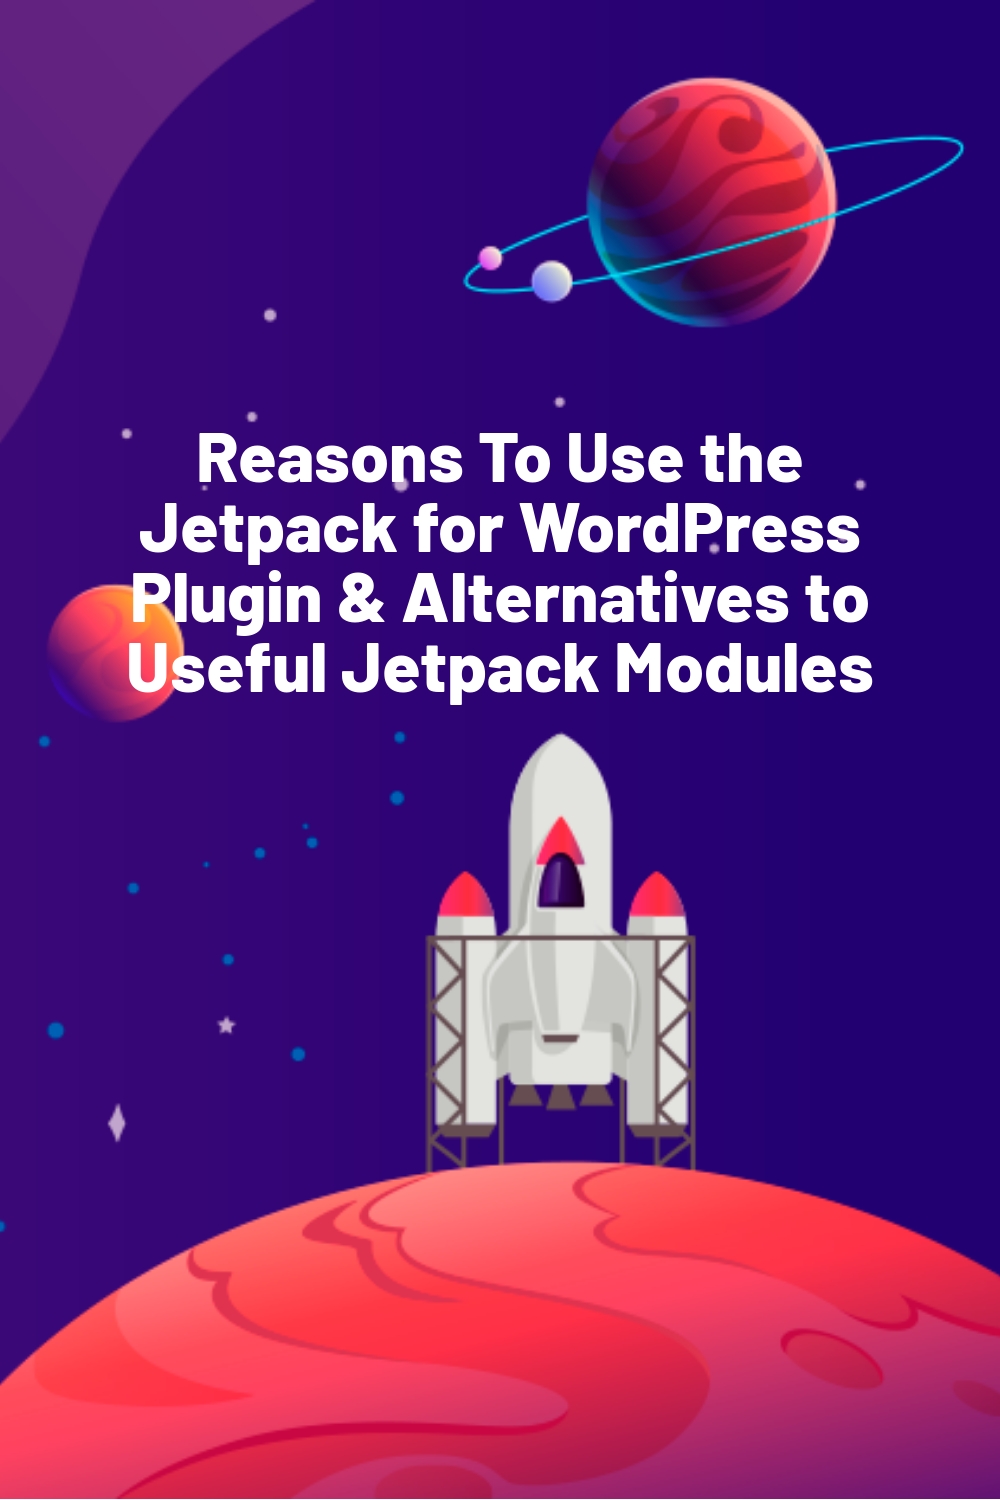 Reasons To Use the Jetpack for WordPress Plugin & Alternatives to Useful Jetpack Modules